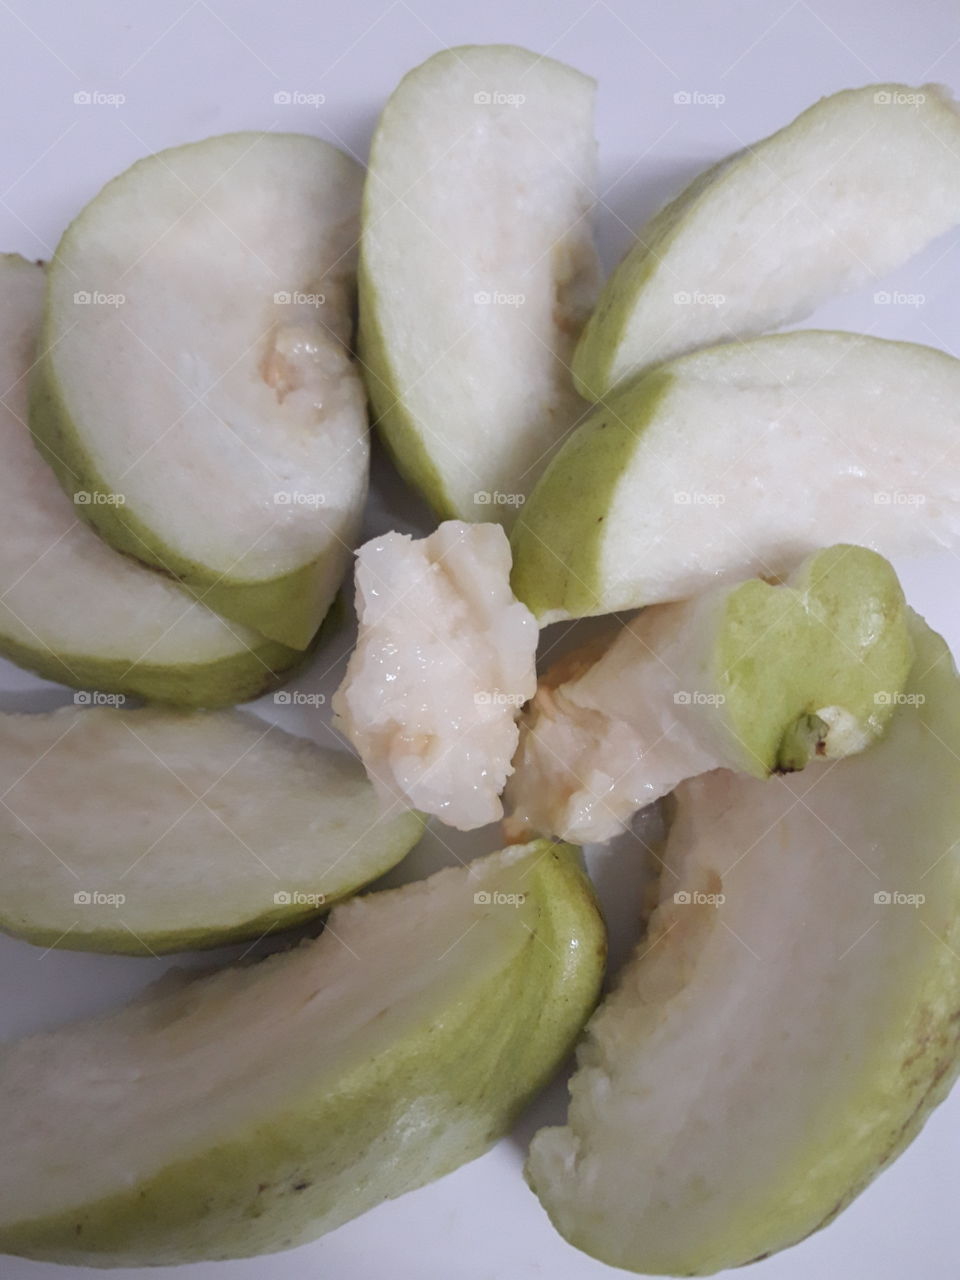 the guava ready to eat.